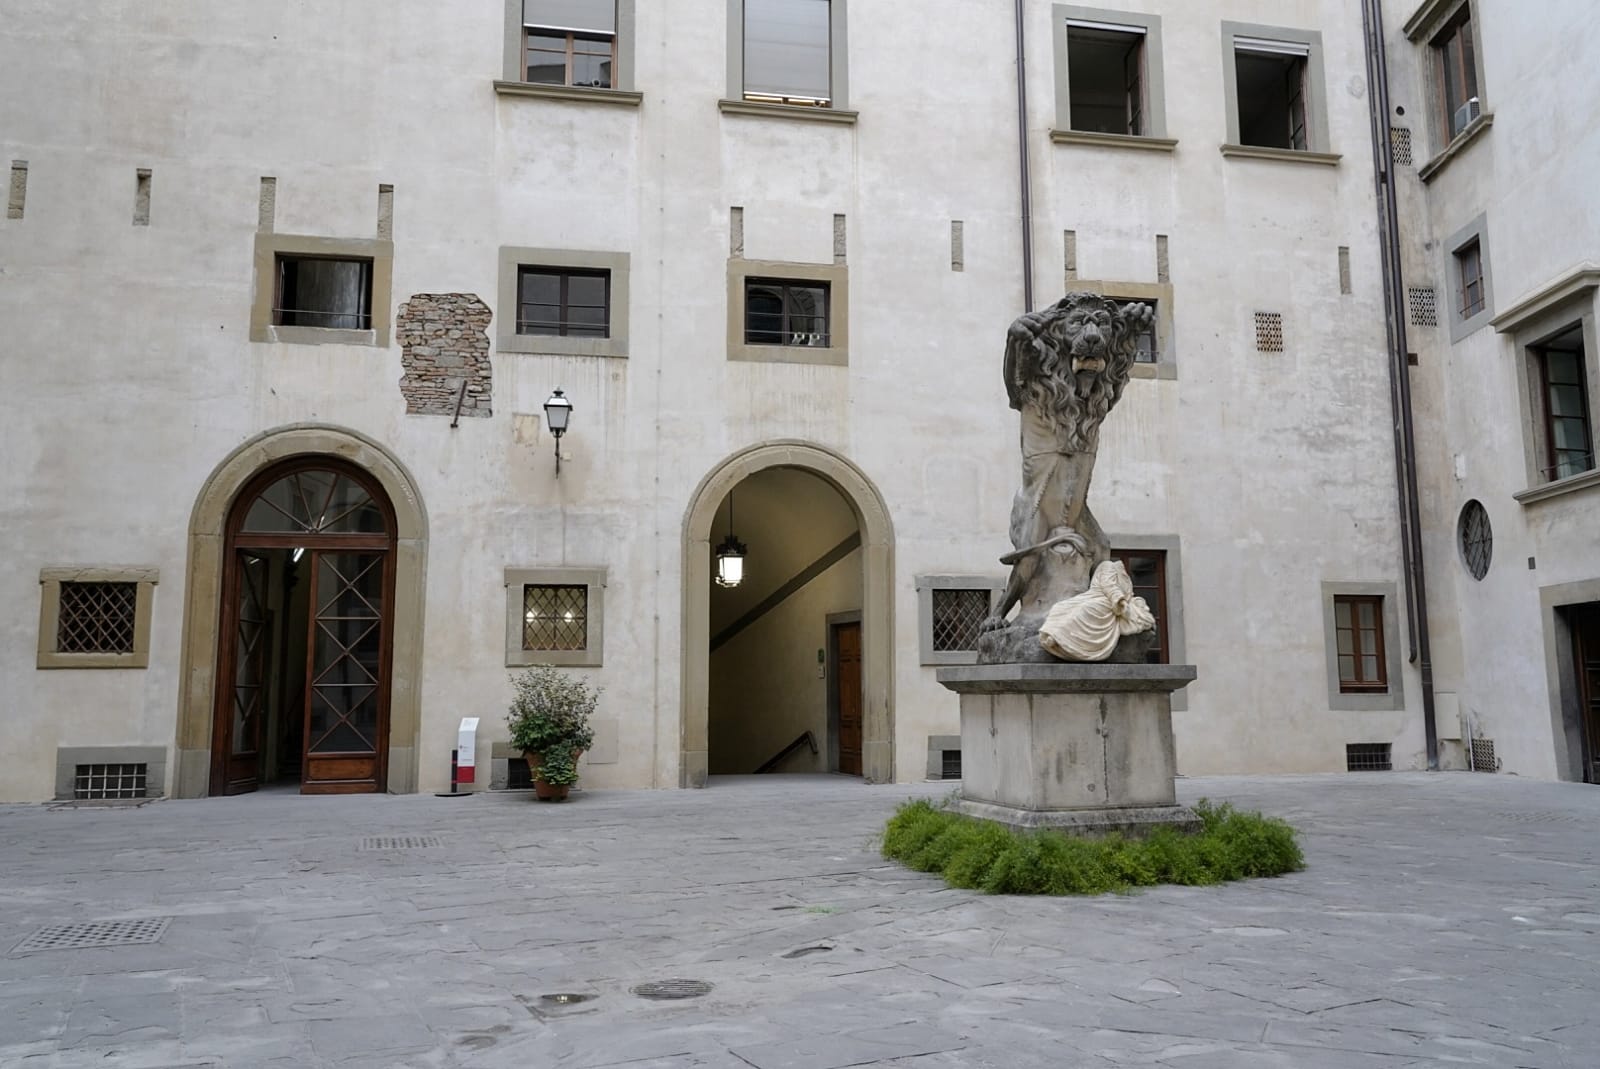 Lion by Francesco Vezzoli in the courtyard of the Palazzo Vecchio